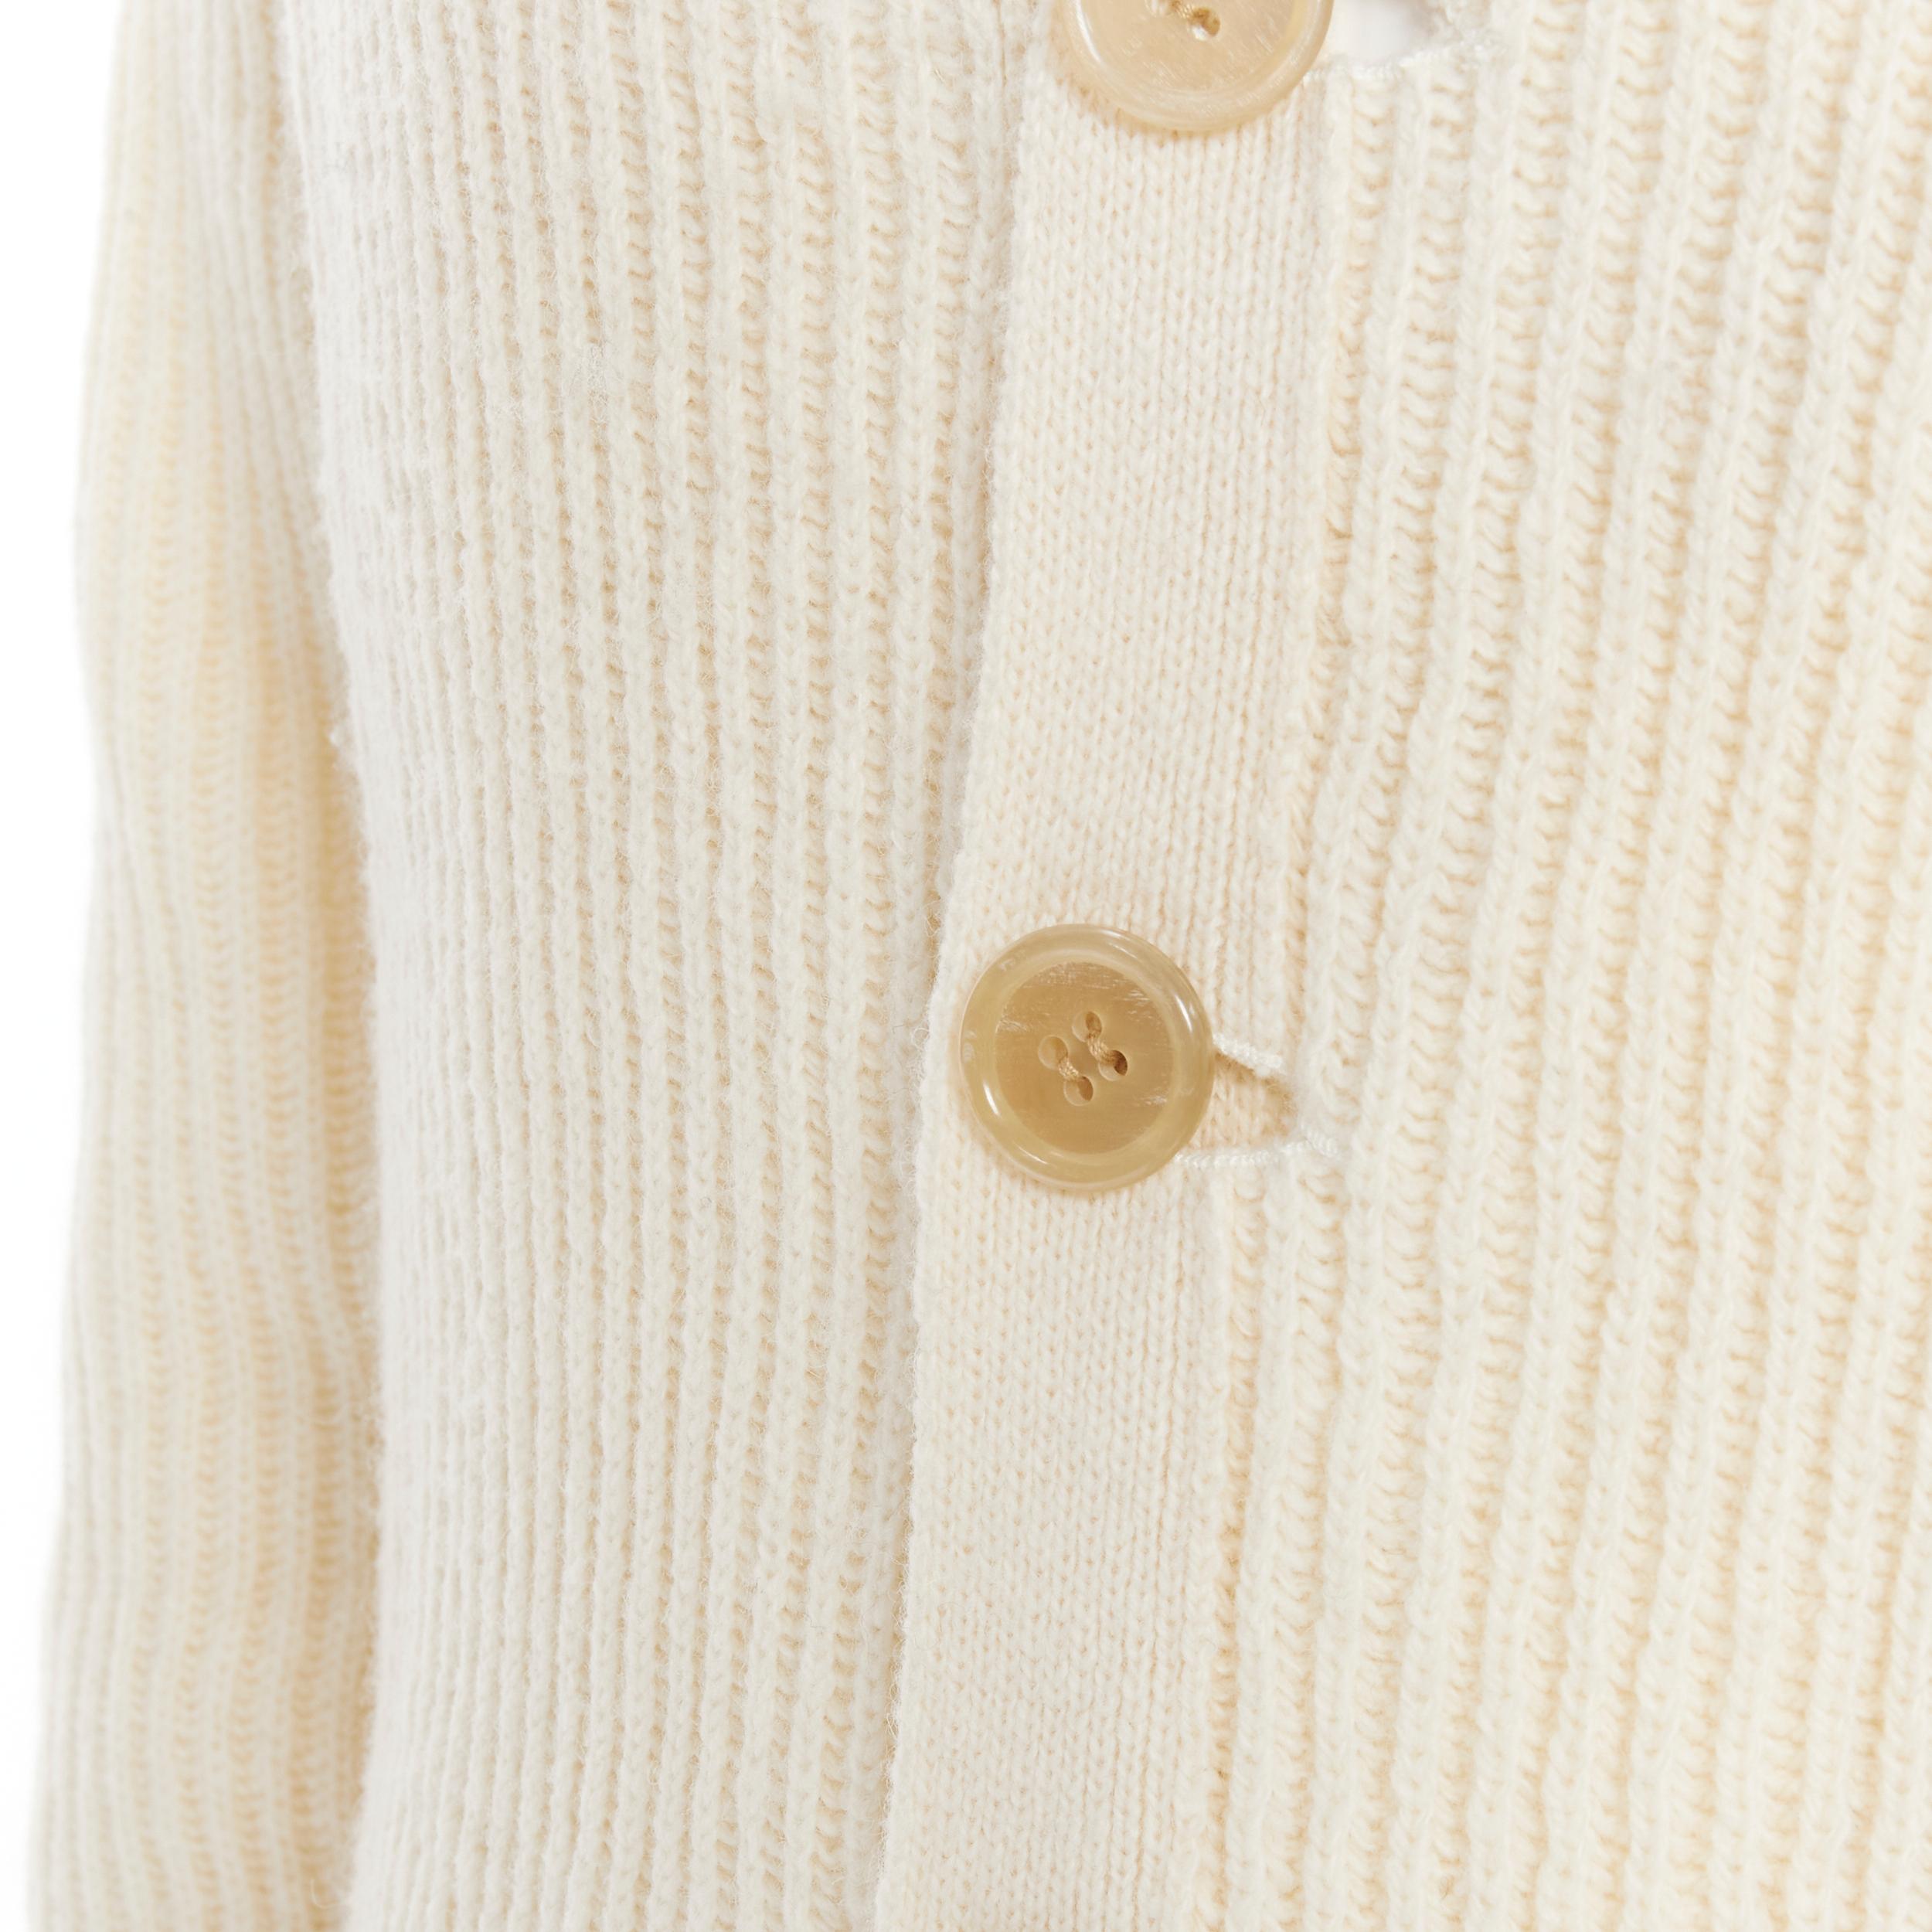 N HOOLYWOOD 100% wool beige ribbed fisherman cardigan sweater UK36 S 
Reference: JOMK/A00022 
Brand: N Hoolywood 
Material: Wool 
Color: Beige 
Pattern: Solid 
Closure: Button 
Extra Detail: Resin button. Dual patch pockets. Cuffed sleeves. 
Made